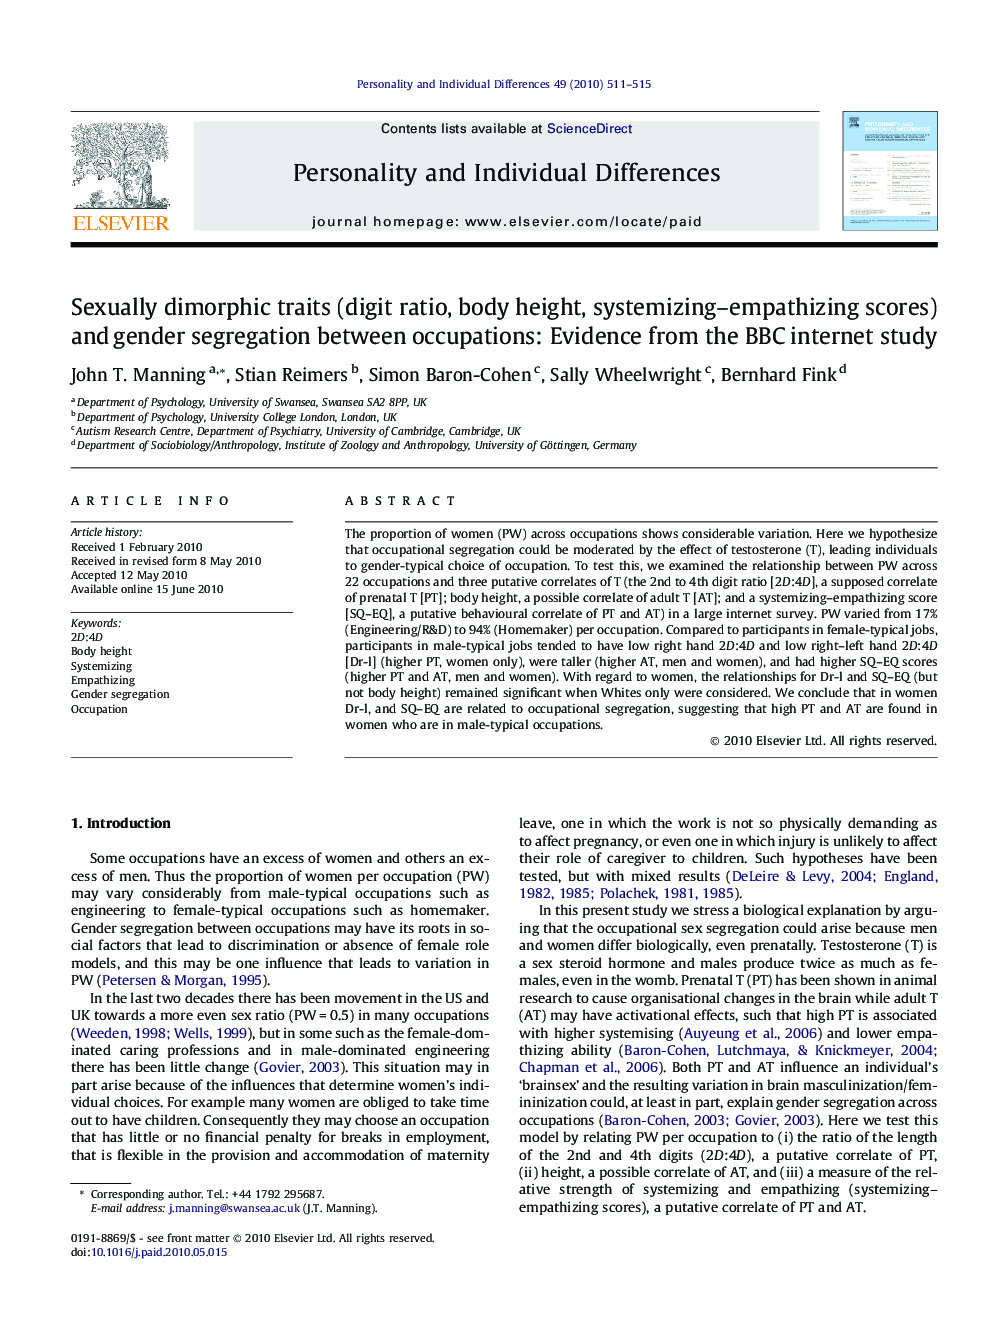 Sexually dimorphic traits (digit ratio, body height, systemizing–empathizing scores) and gender segregation between occupations: Evidence from the BBC internet study